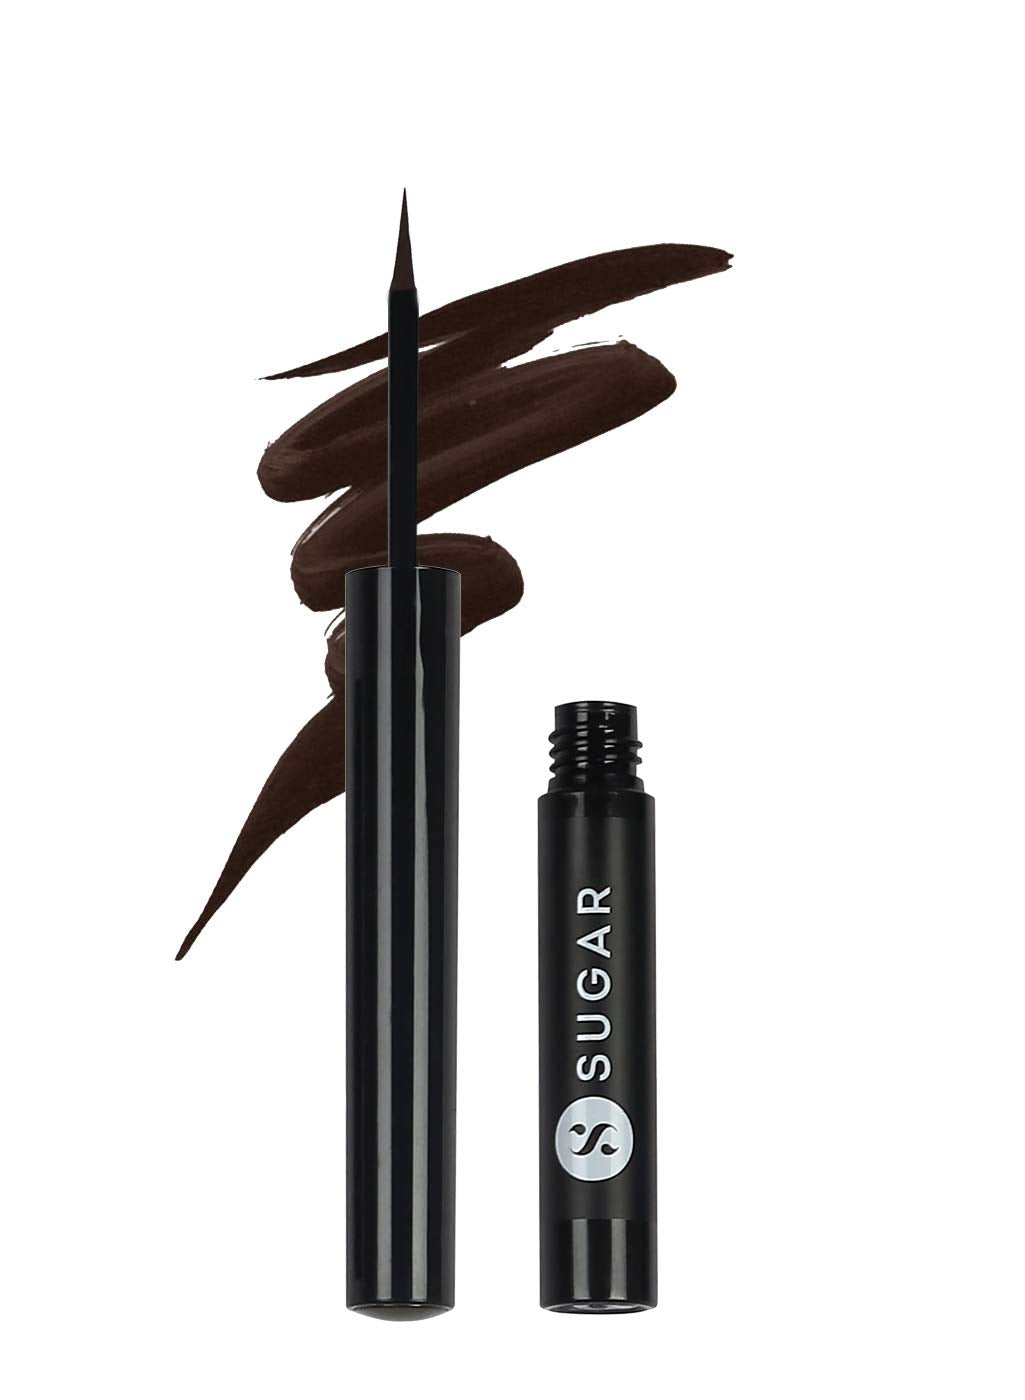 SUGAR Cosmetics Eye Warned You So! Double Matte Eyeliner - 04 Coffee Shop (Dark Chocolate Brown) Intensely Pigmented Liquid, Sweat Proof, Moisture Resistant, Long Lasting, Matte Finish